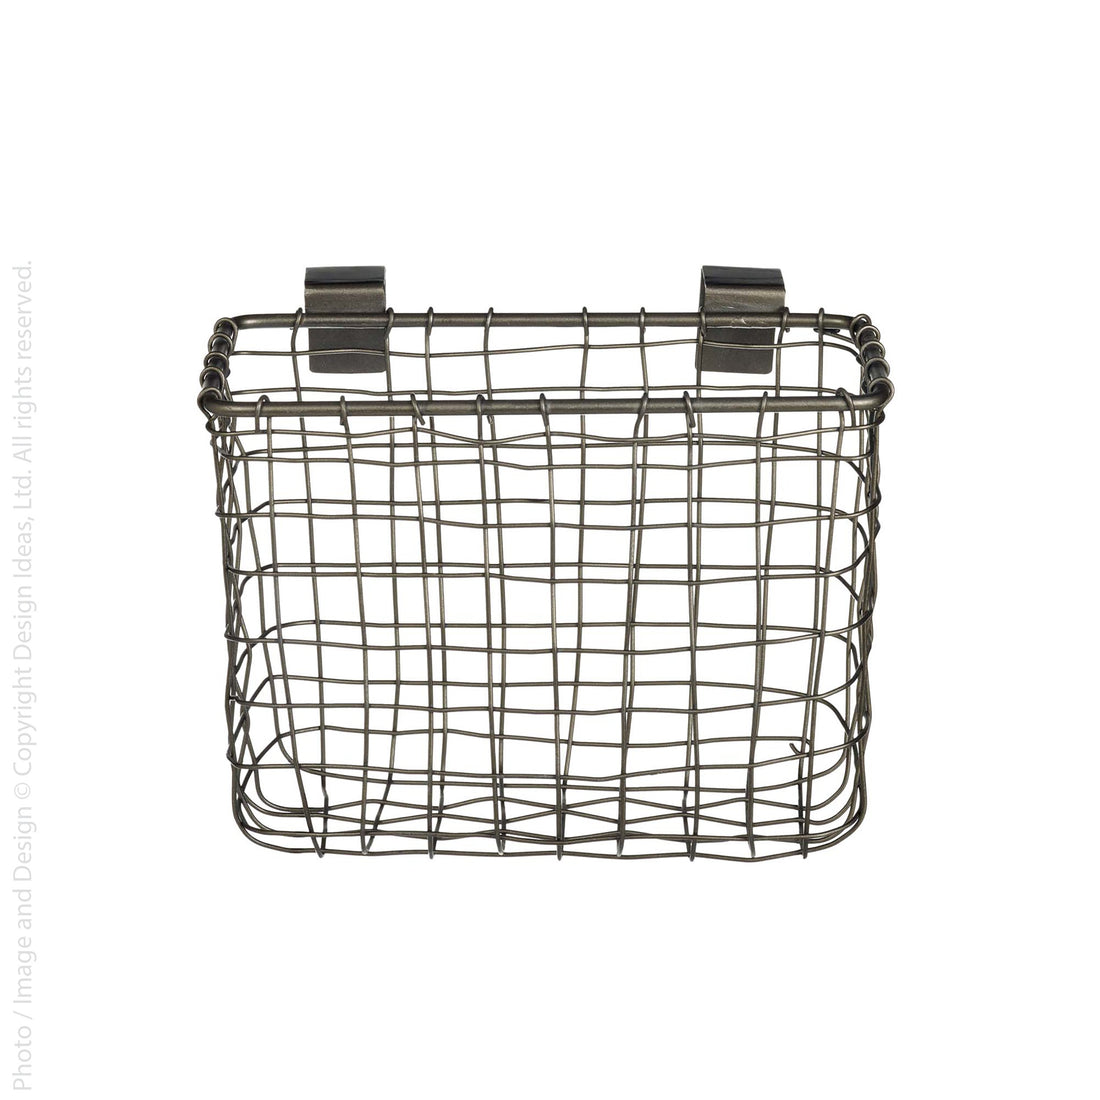 Cabo™ woven wire ladder basket (small)